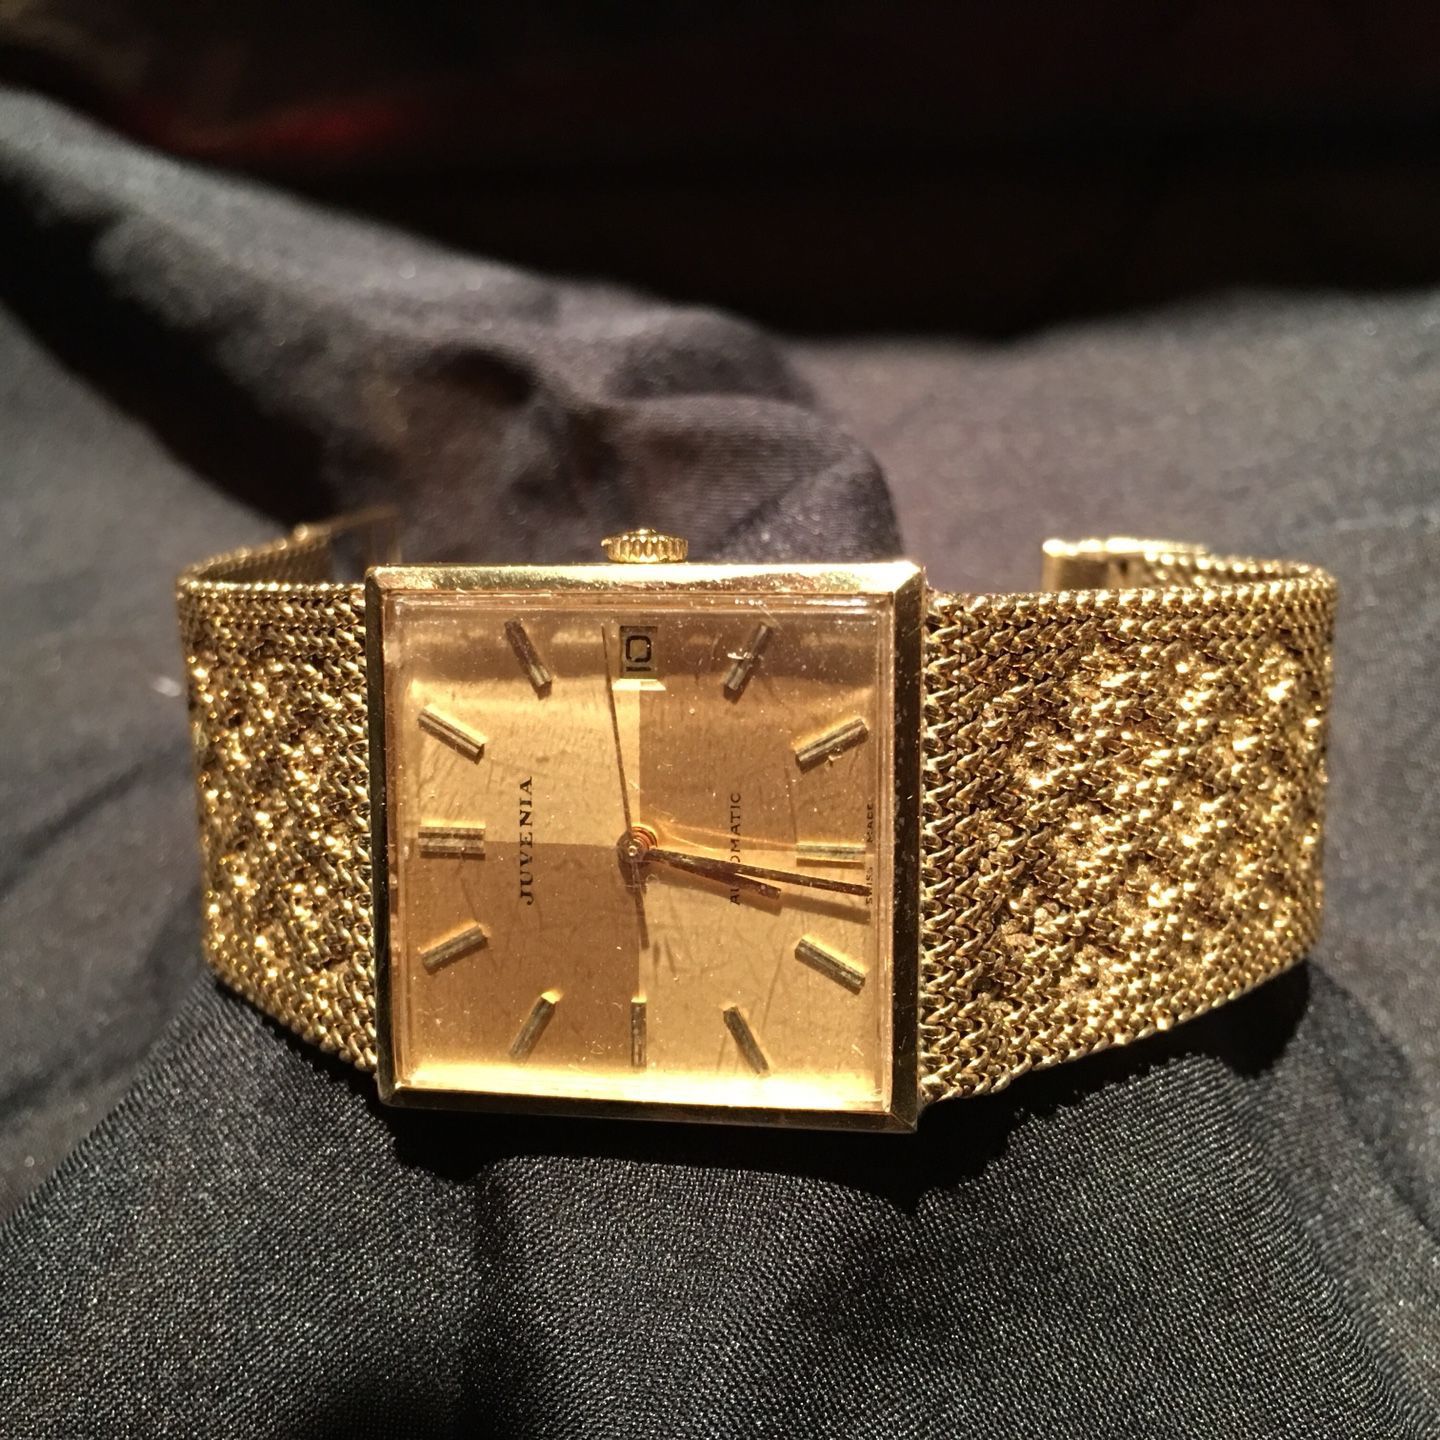 18k Solid Gold Juvenia Men’s watch for Sale in Chicago, IL - OfferUp